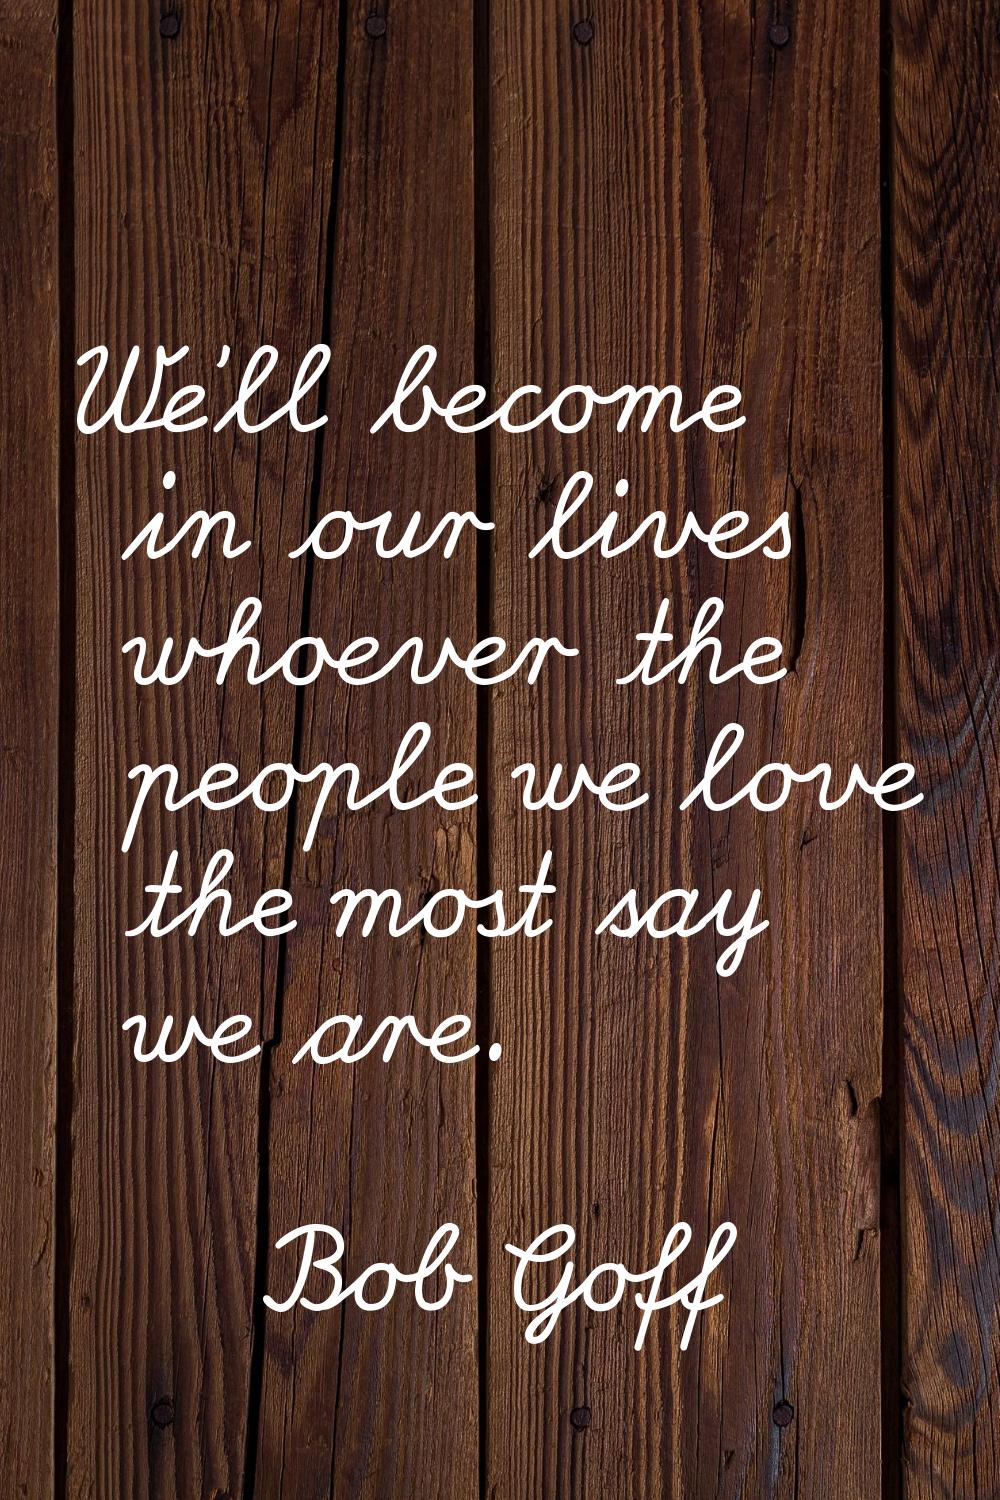 We'll become in our lives whoever the people we love the most say we are.